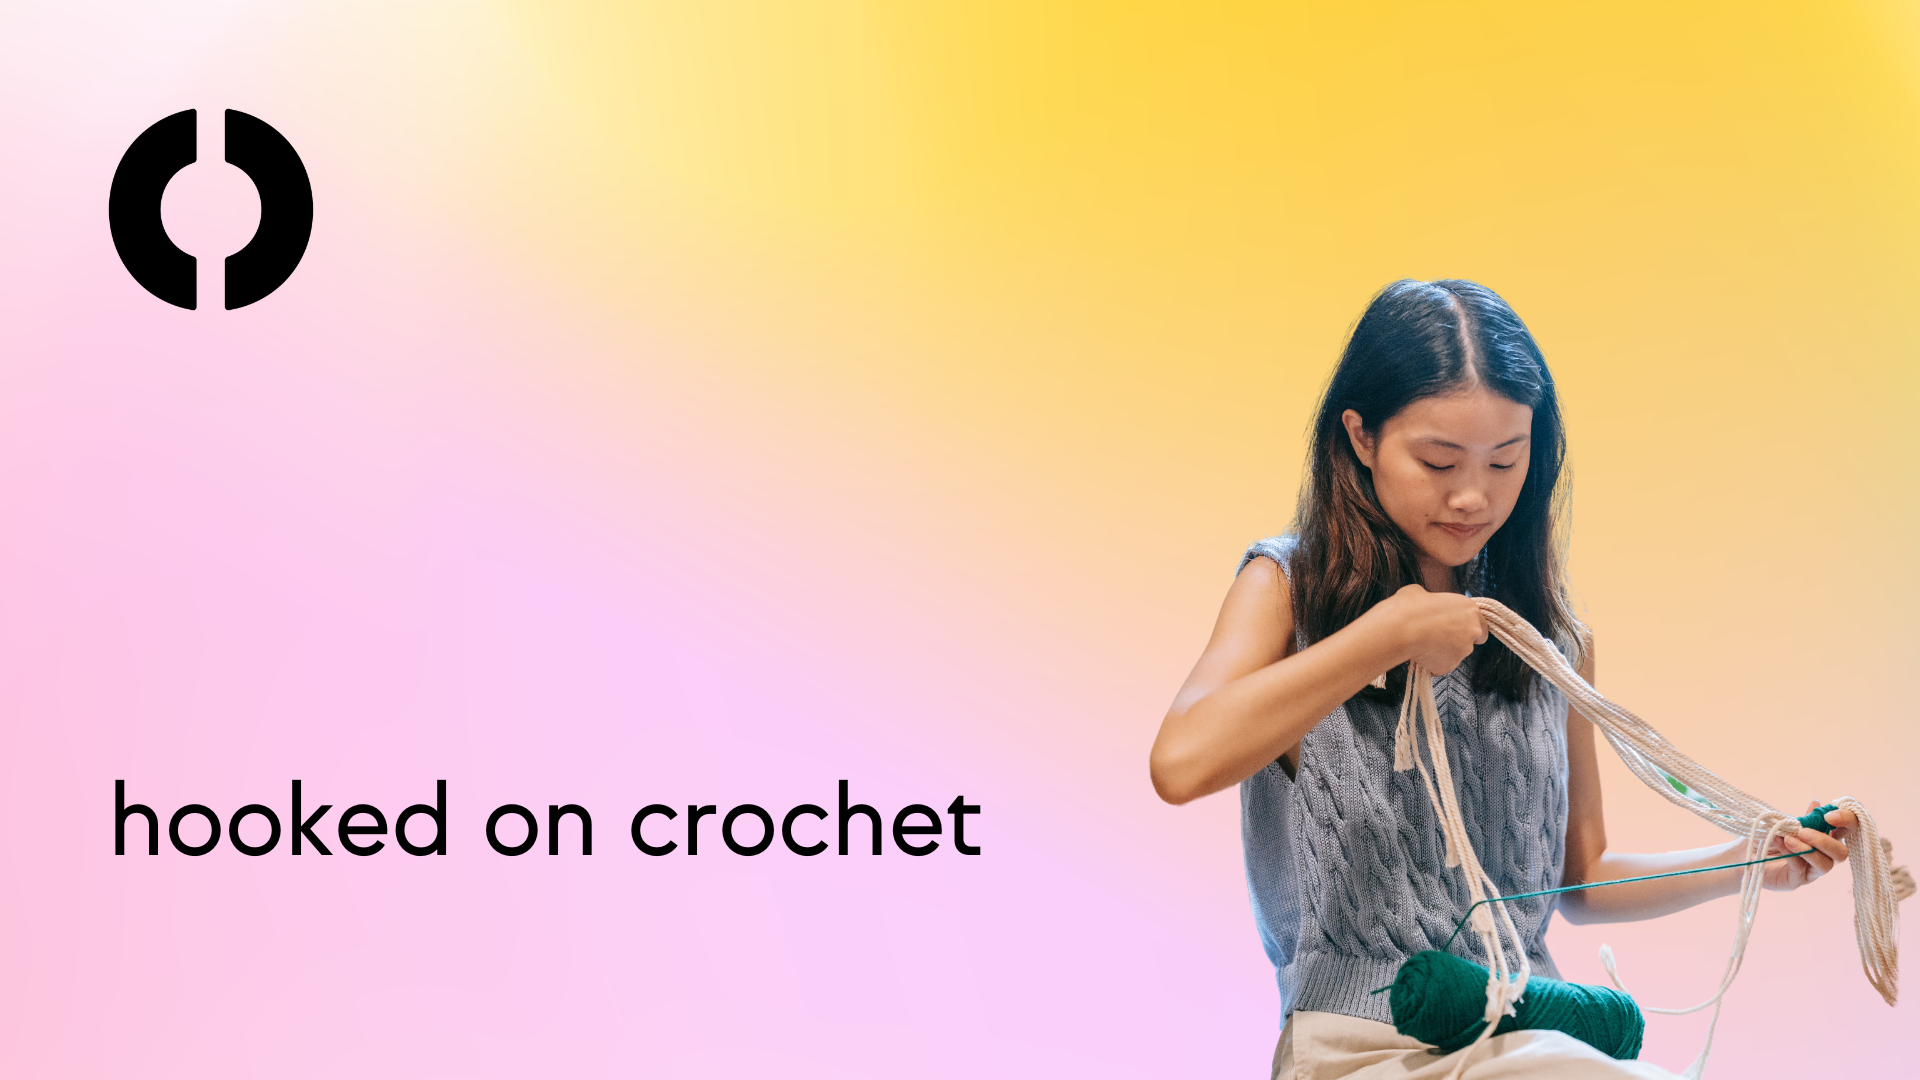 Lavender and yellow gradient image background, with an image of a young woman knitting crochet pieces. An allcove logo mark in on the top left corner, with text in the bottom left corner which reads "hooked on crochet."